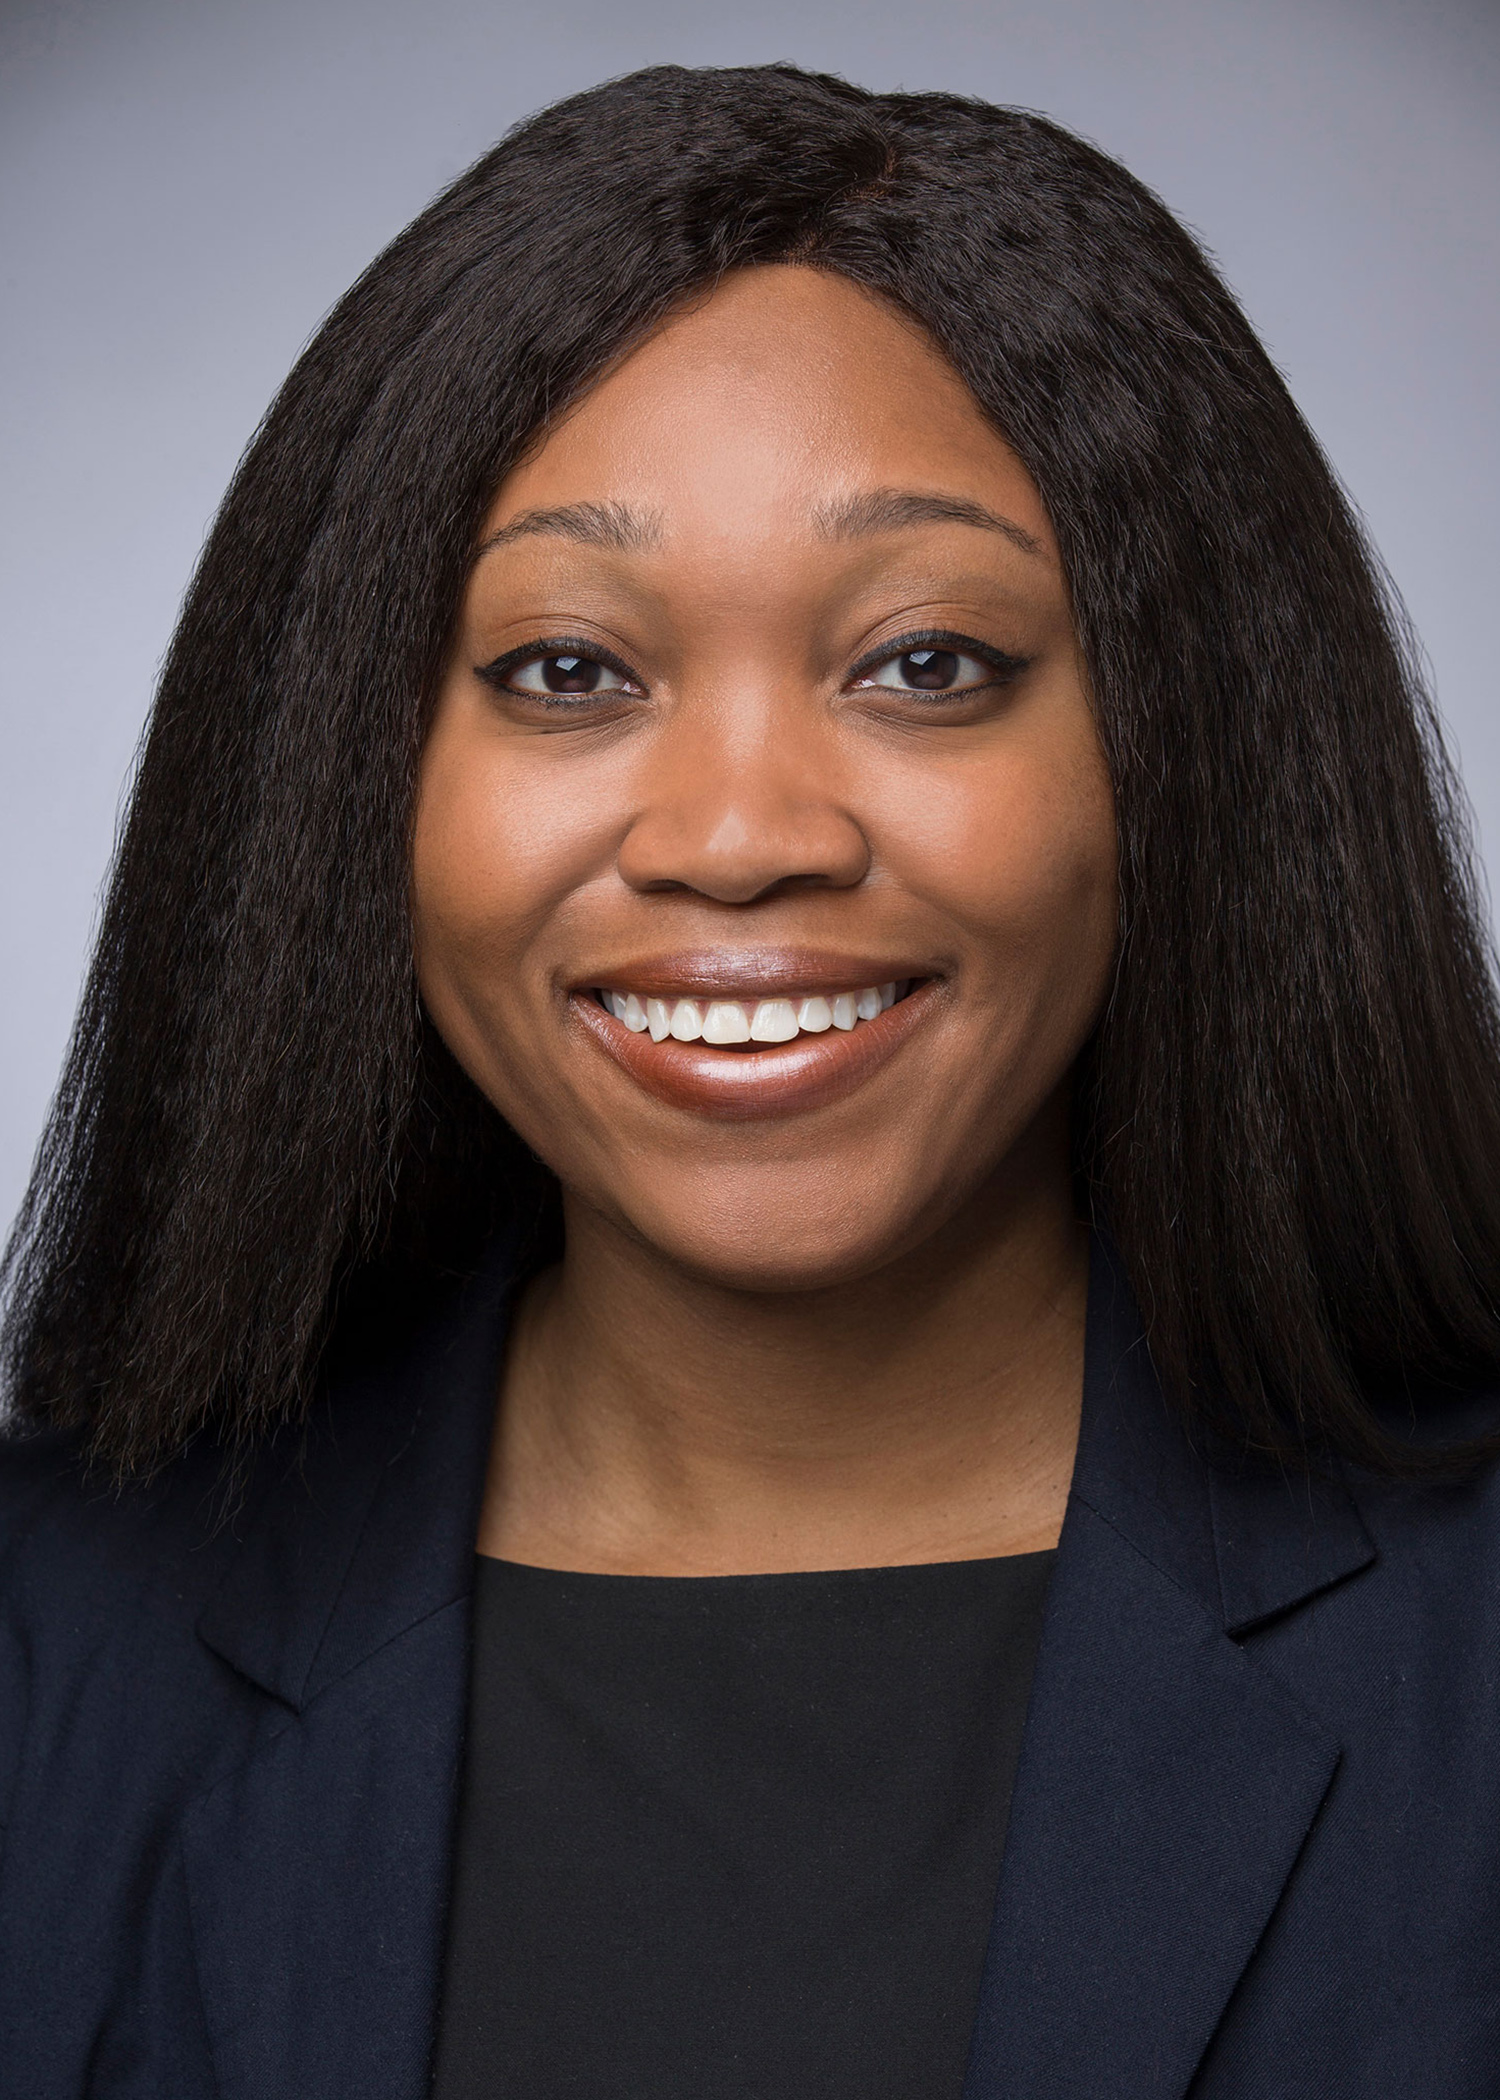 Iffy Akwule was added to Wilmington Trust's D.C. office as an investment associate.